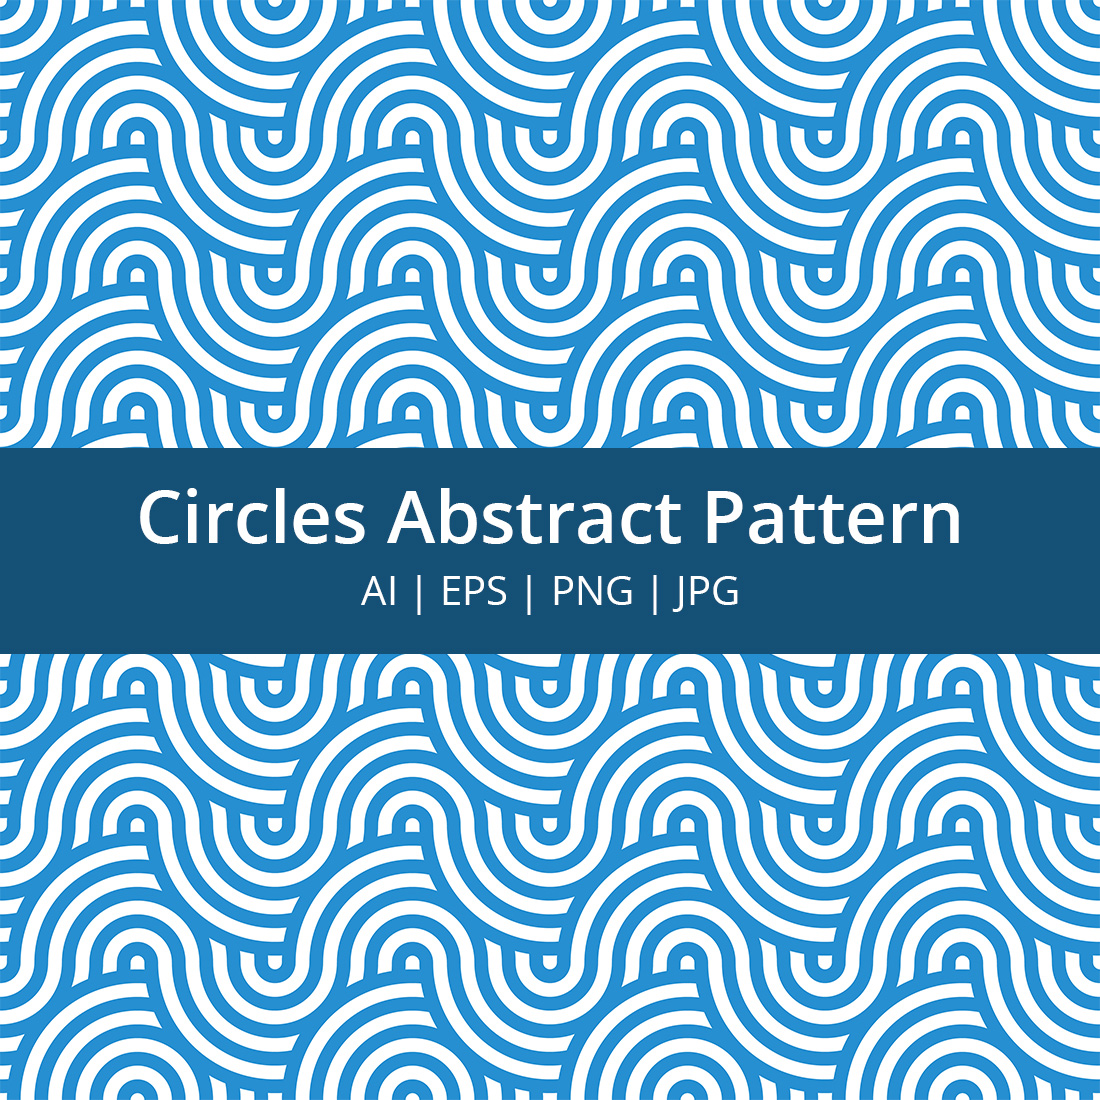 Blue and white pattern with the words circles abstract pattern.